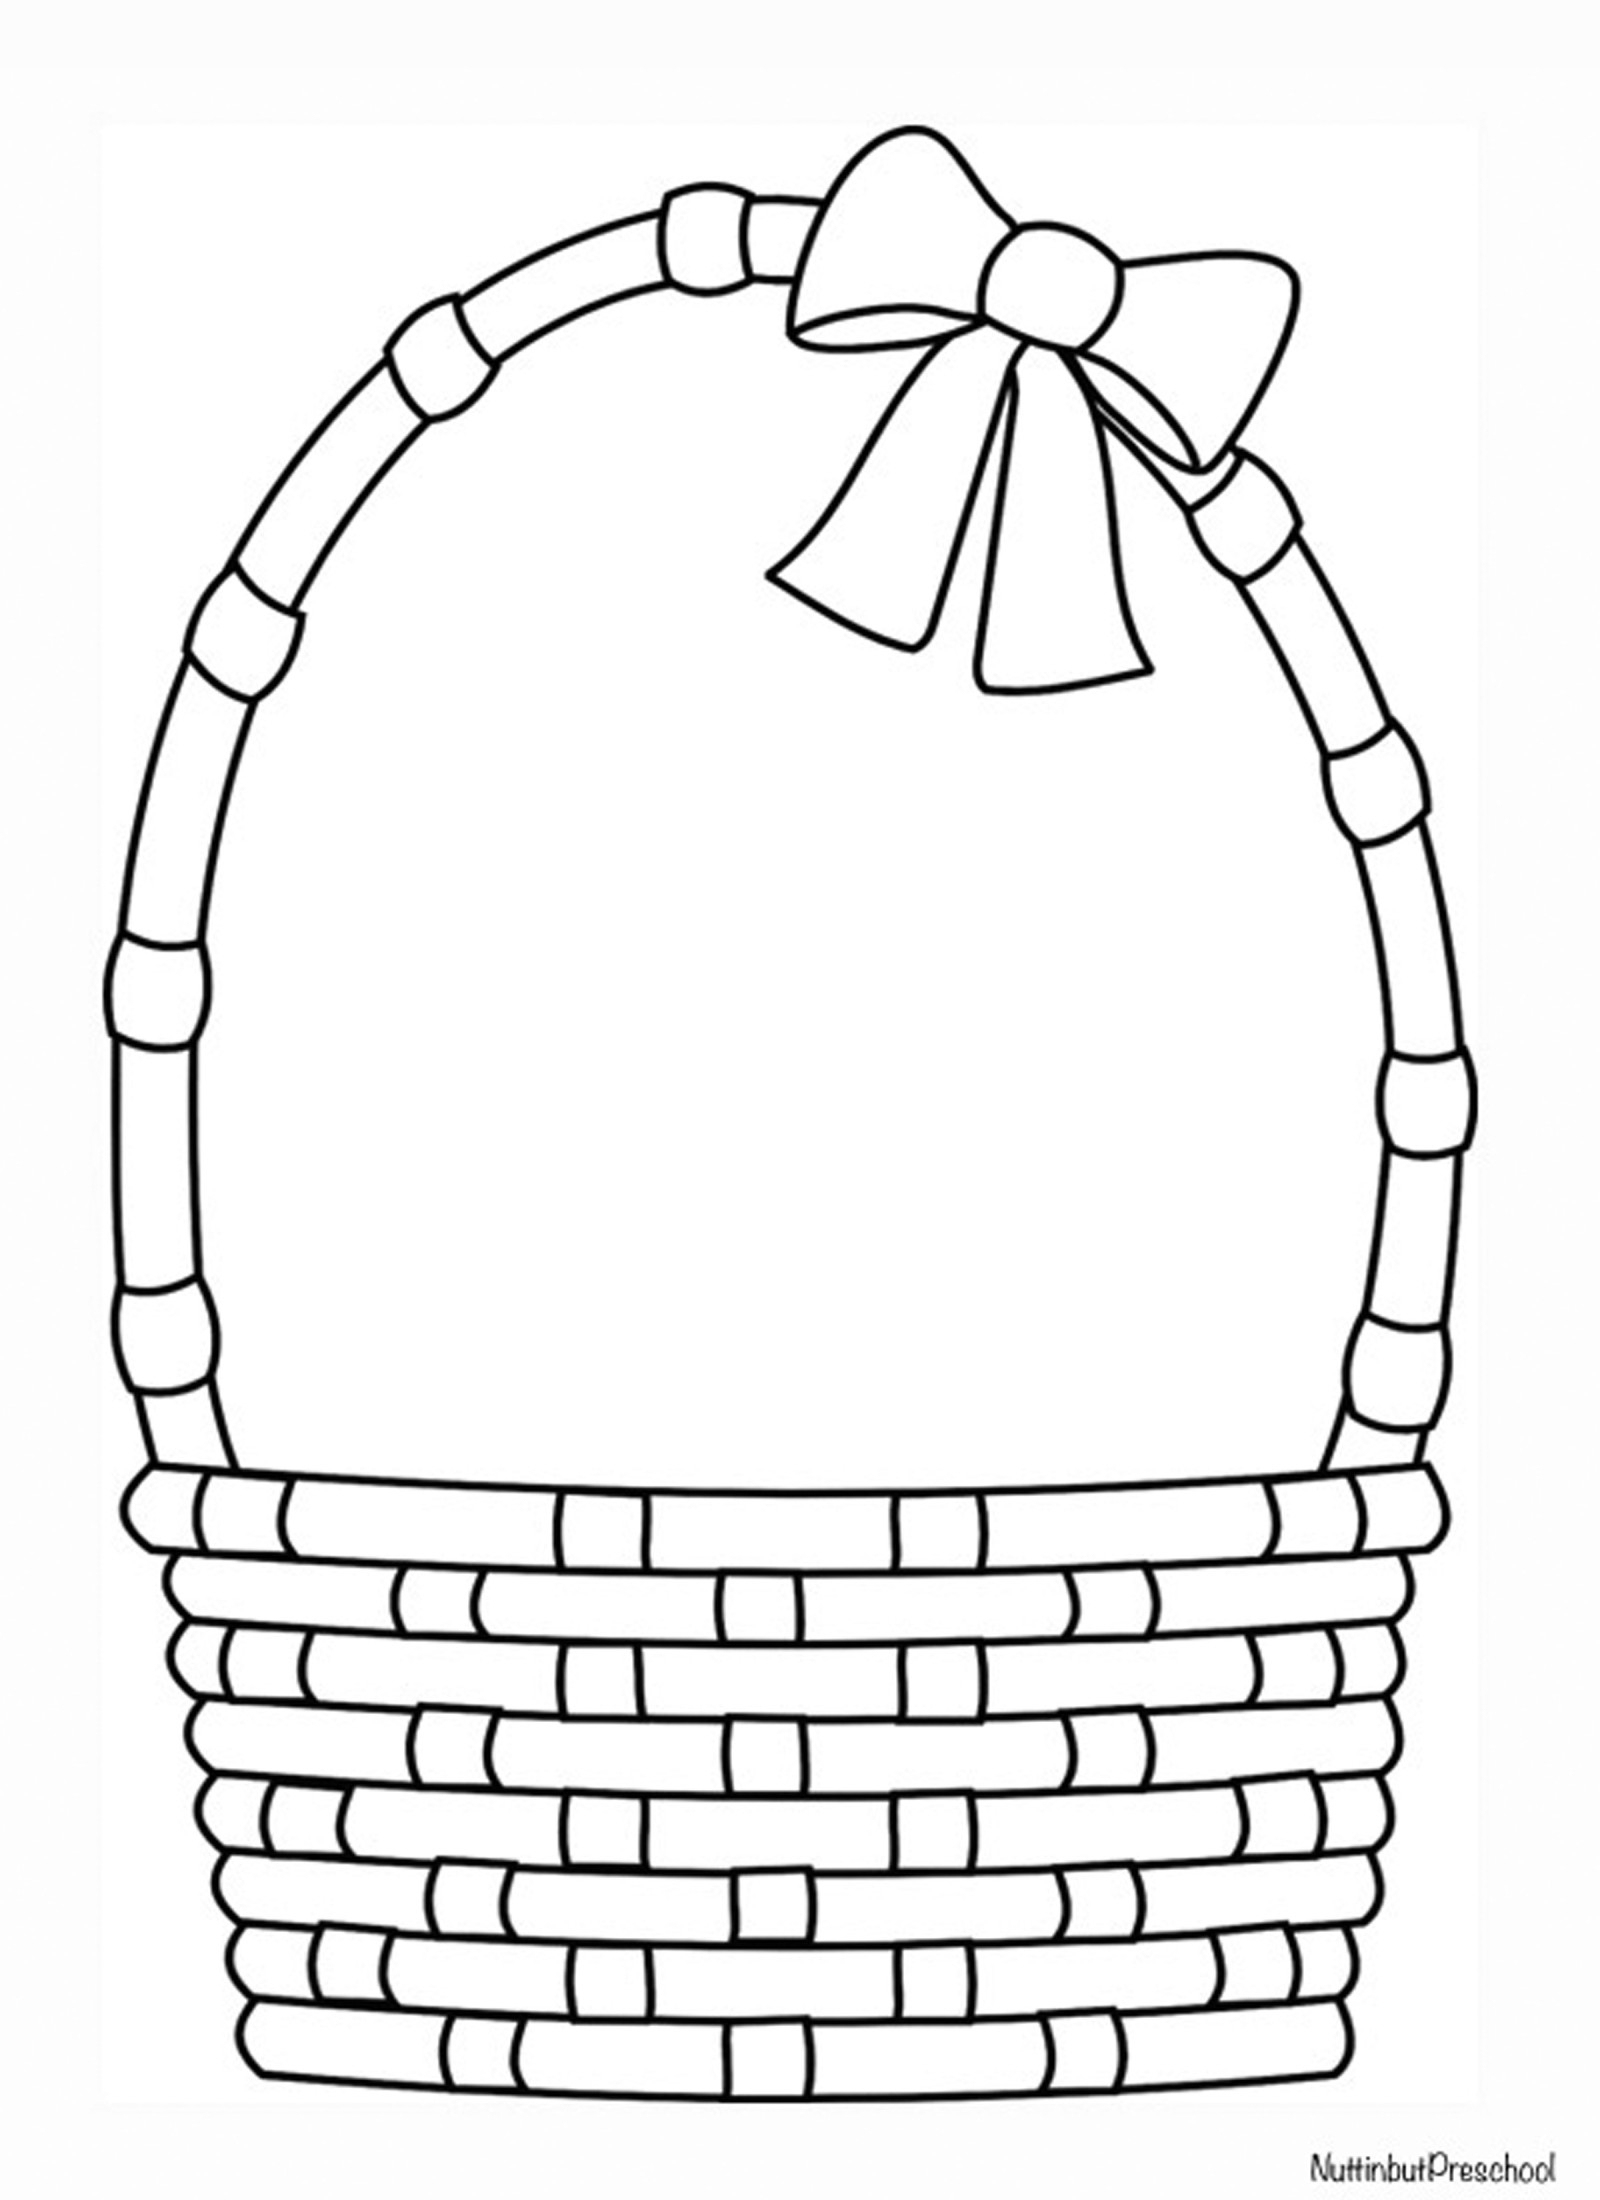 Easter Basket Coloring Pages Awesome Empty Fruit Collection - Free Printable Coloring Pages Easter Basket